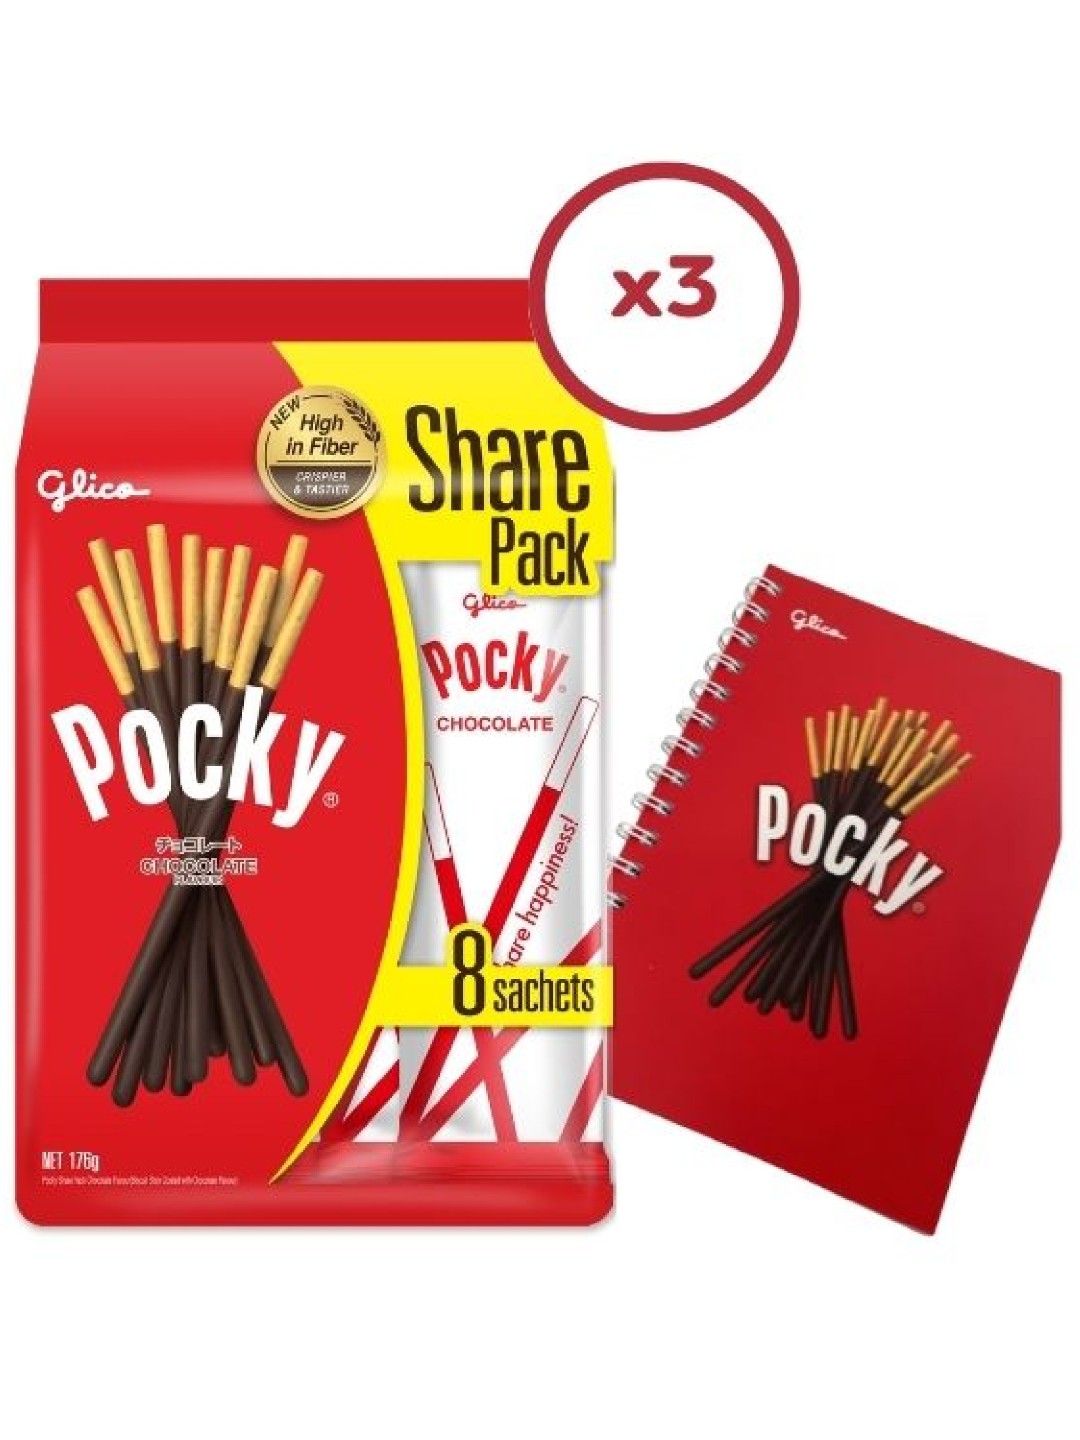 Pocky Chocolate Biscuit Sticks Share Pack (Bundle of 3) with FREE Glico Notebook (No Color- Image 1)